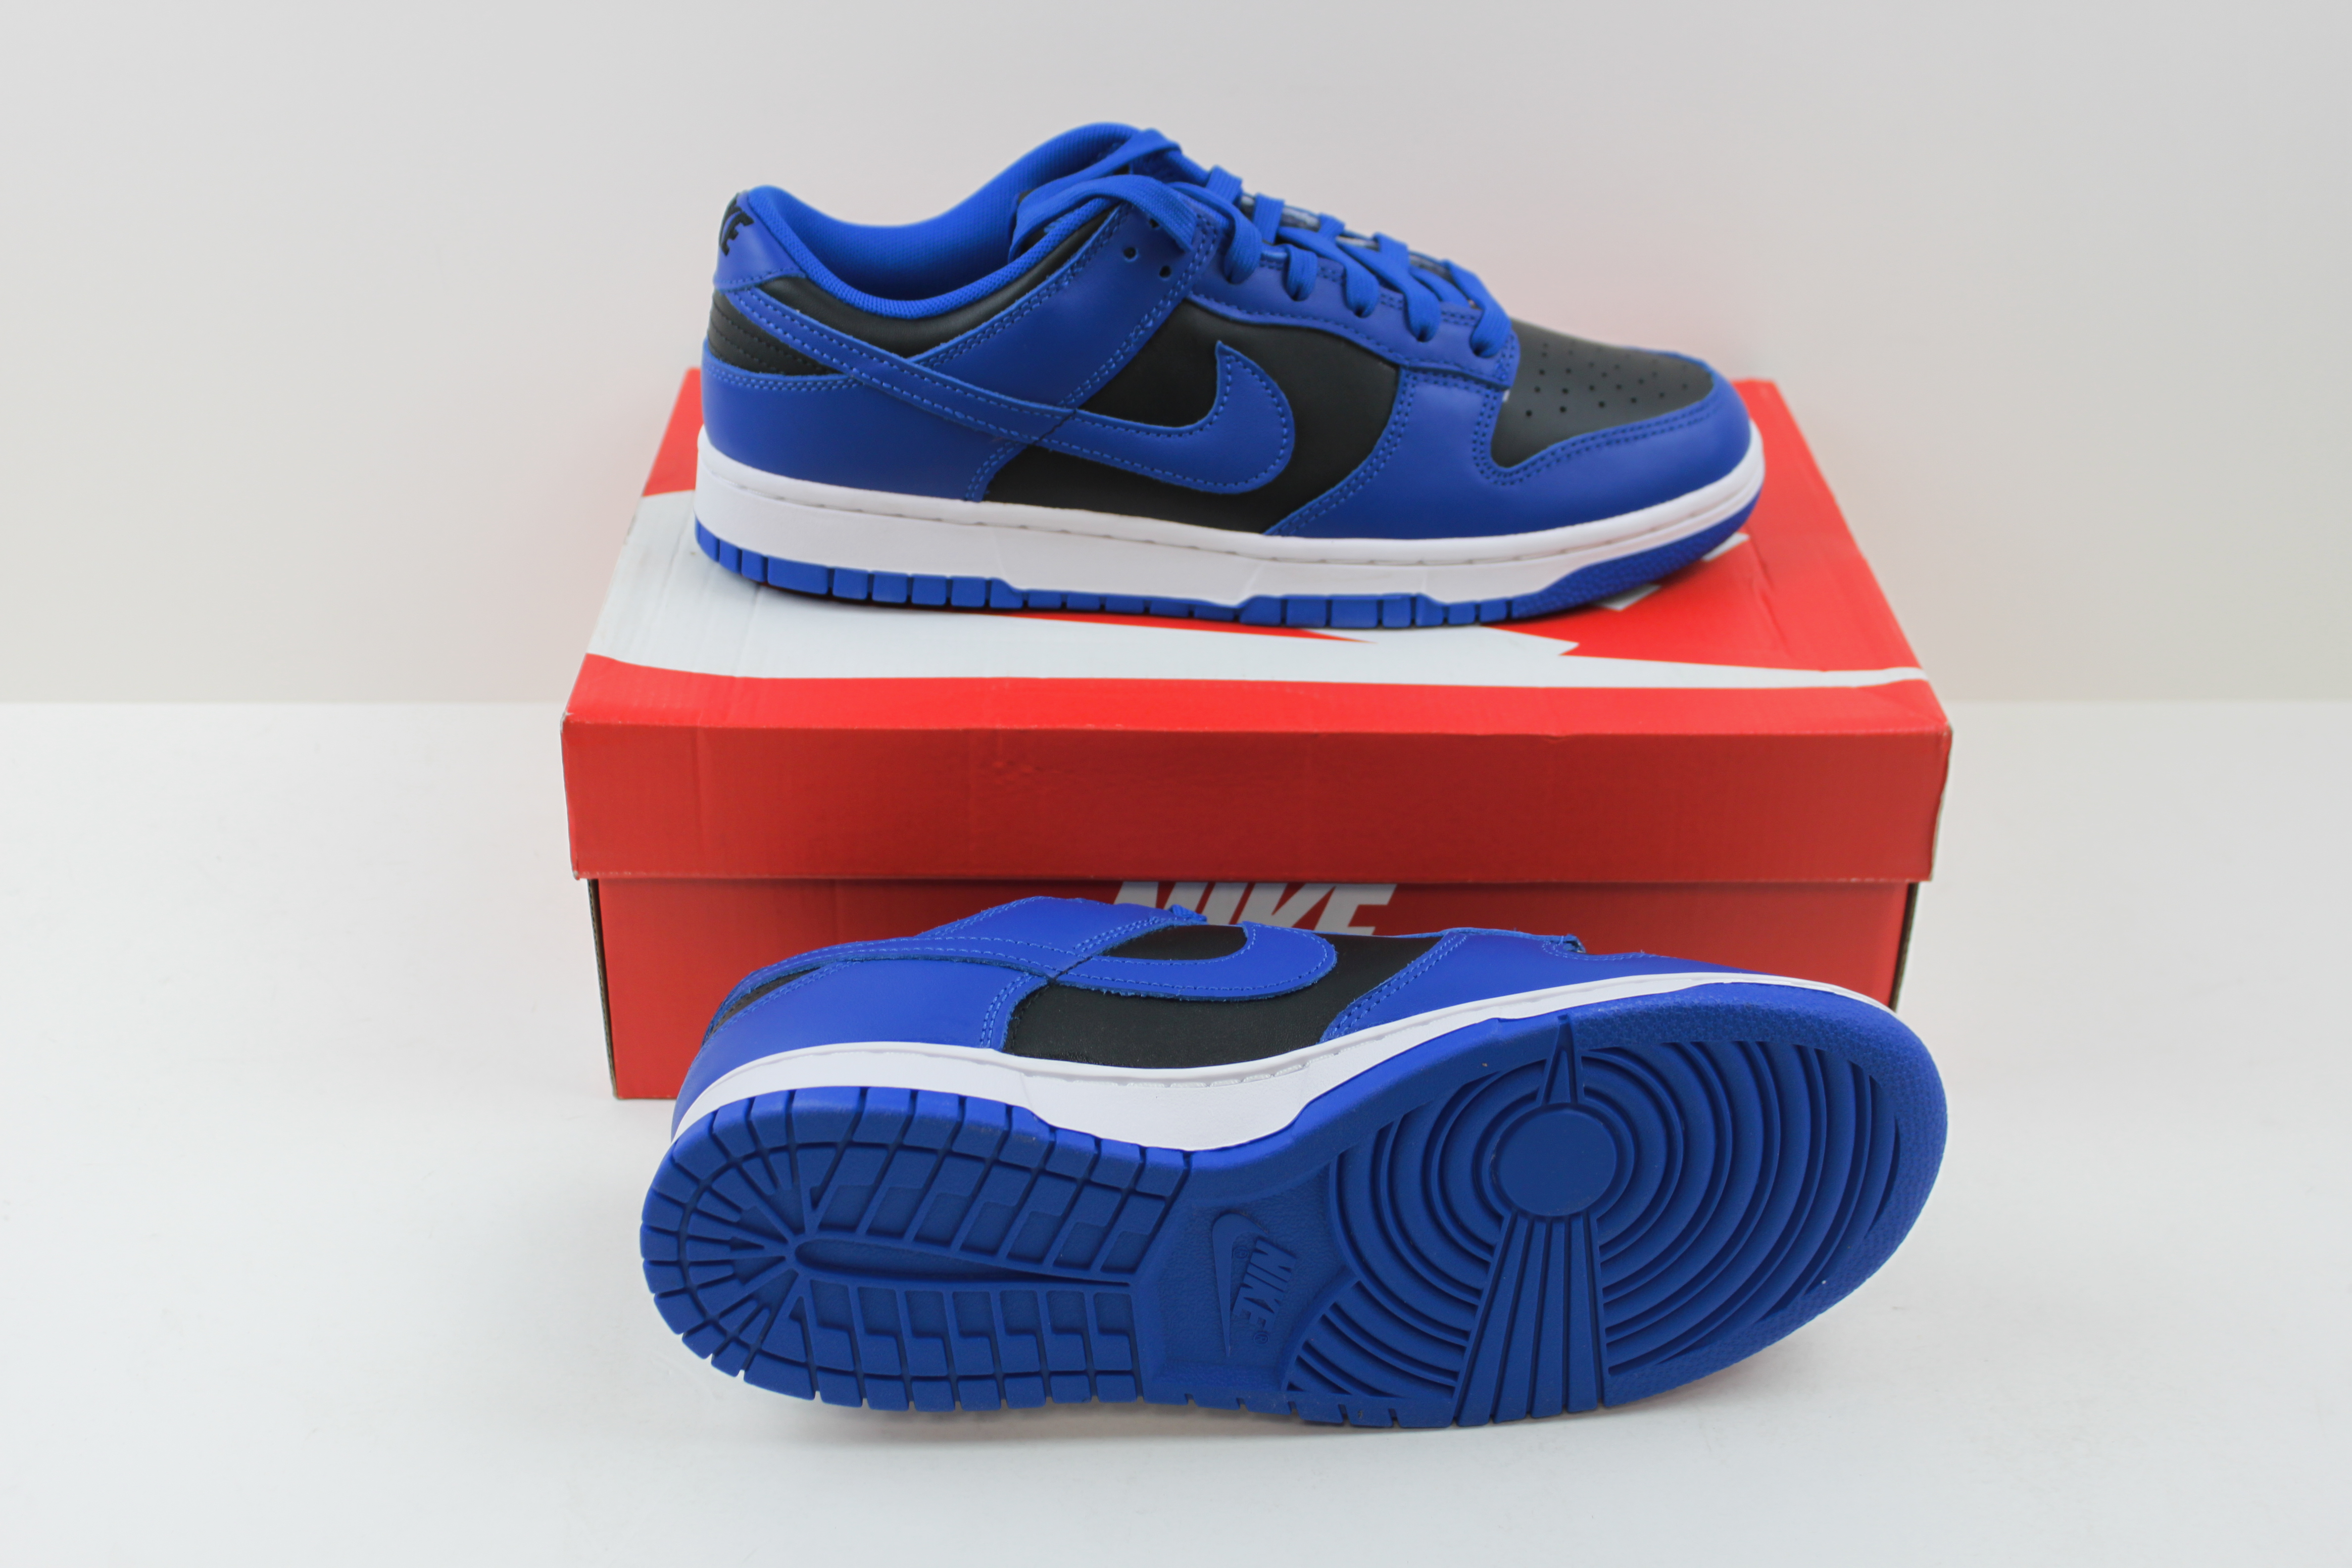 Nike Men's Dunk Low Retro Trainers, Black and Hyper Cobalt, UK 8.5 - Image 2 of 5